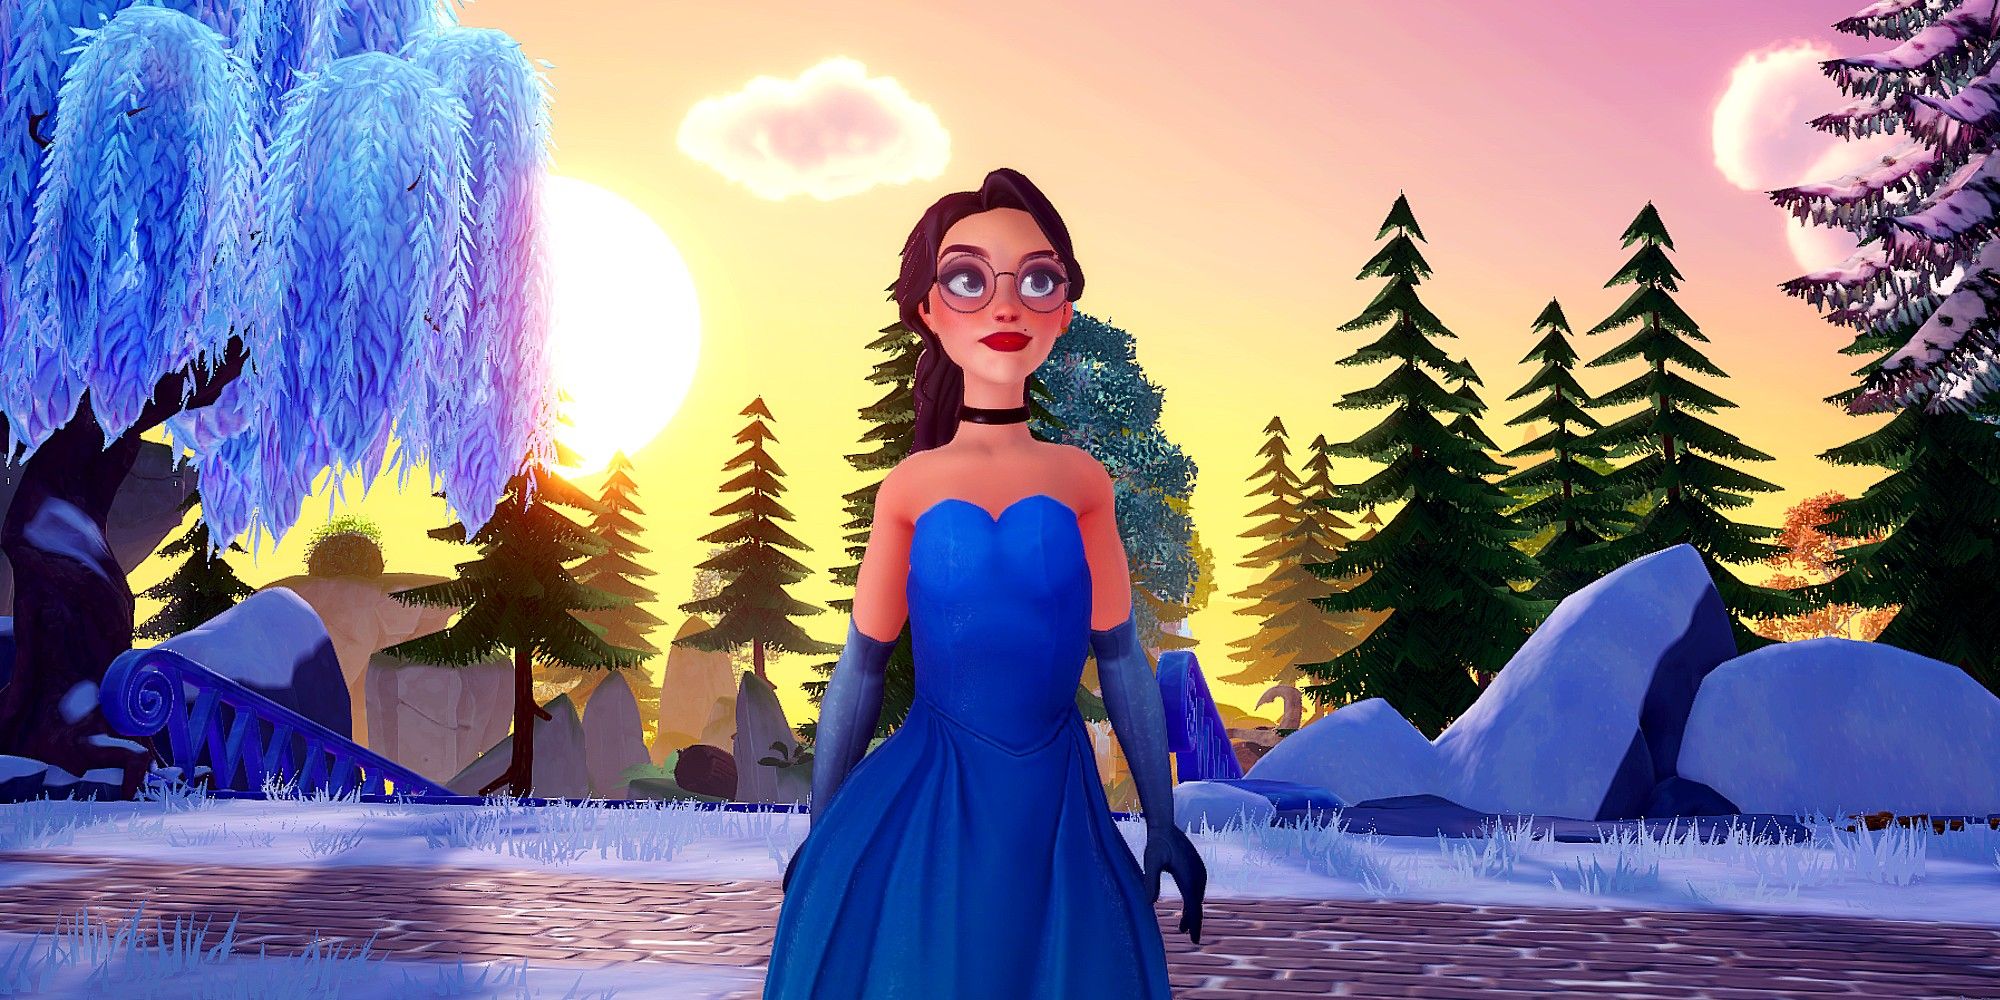 Glittering blue ice makes for a welcome change from the norm in Dreamlight Valley